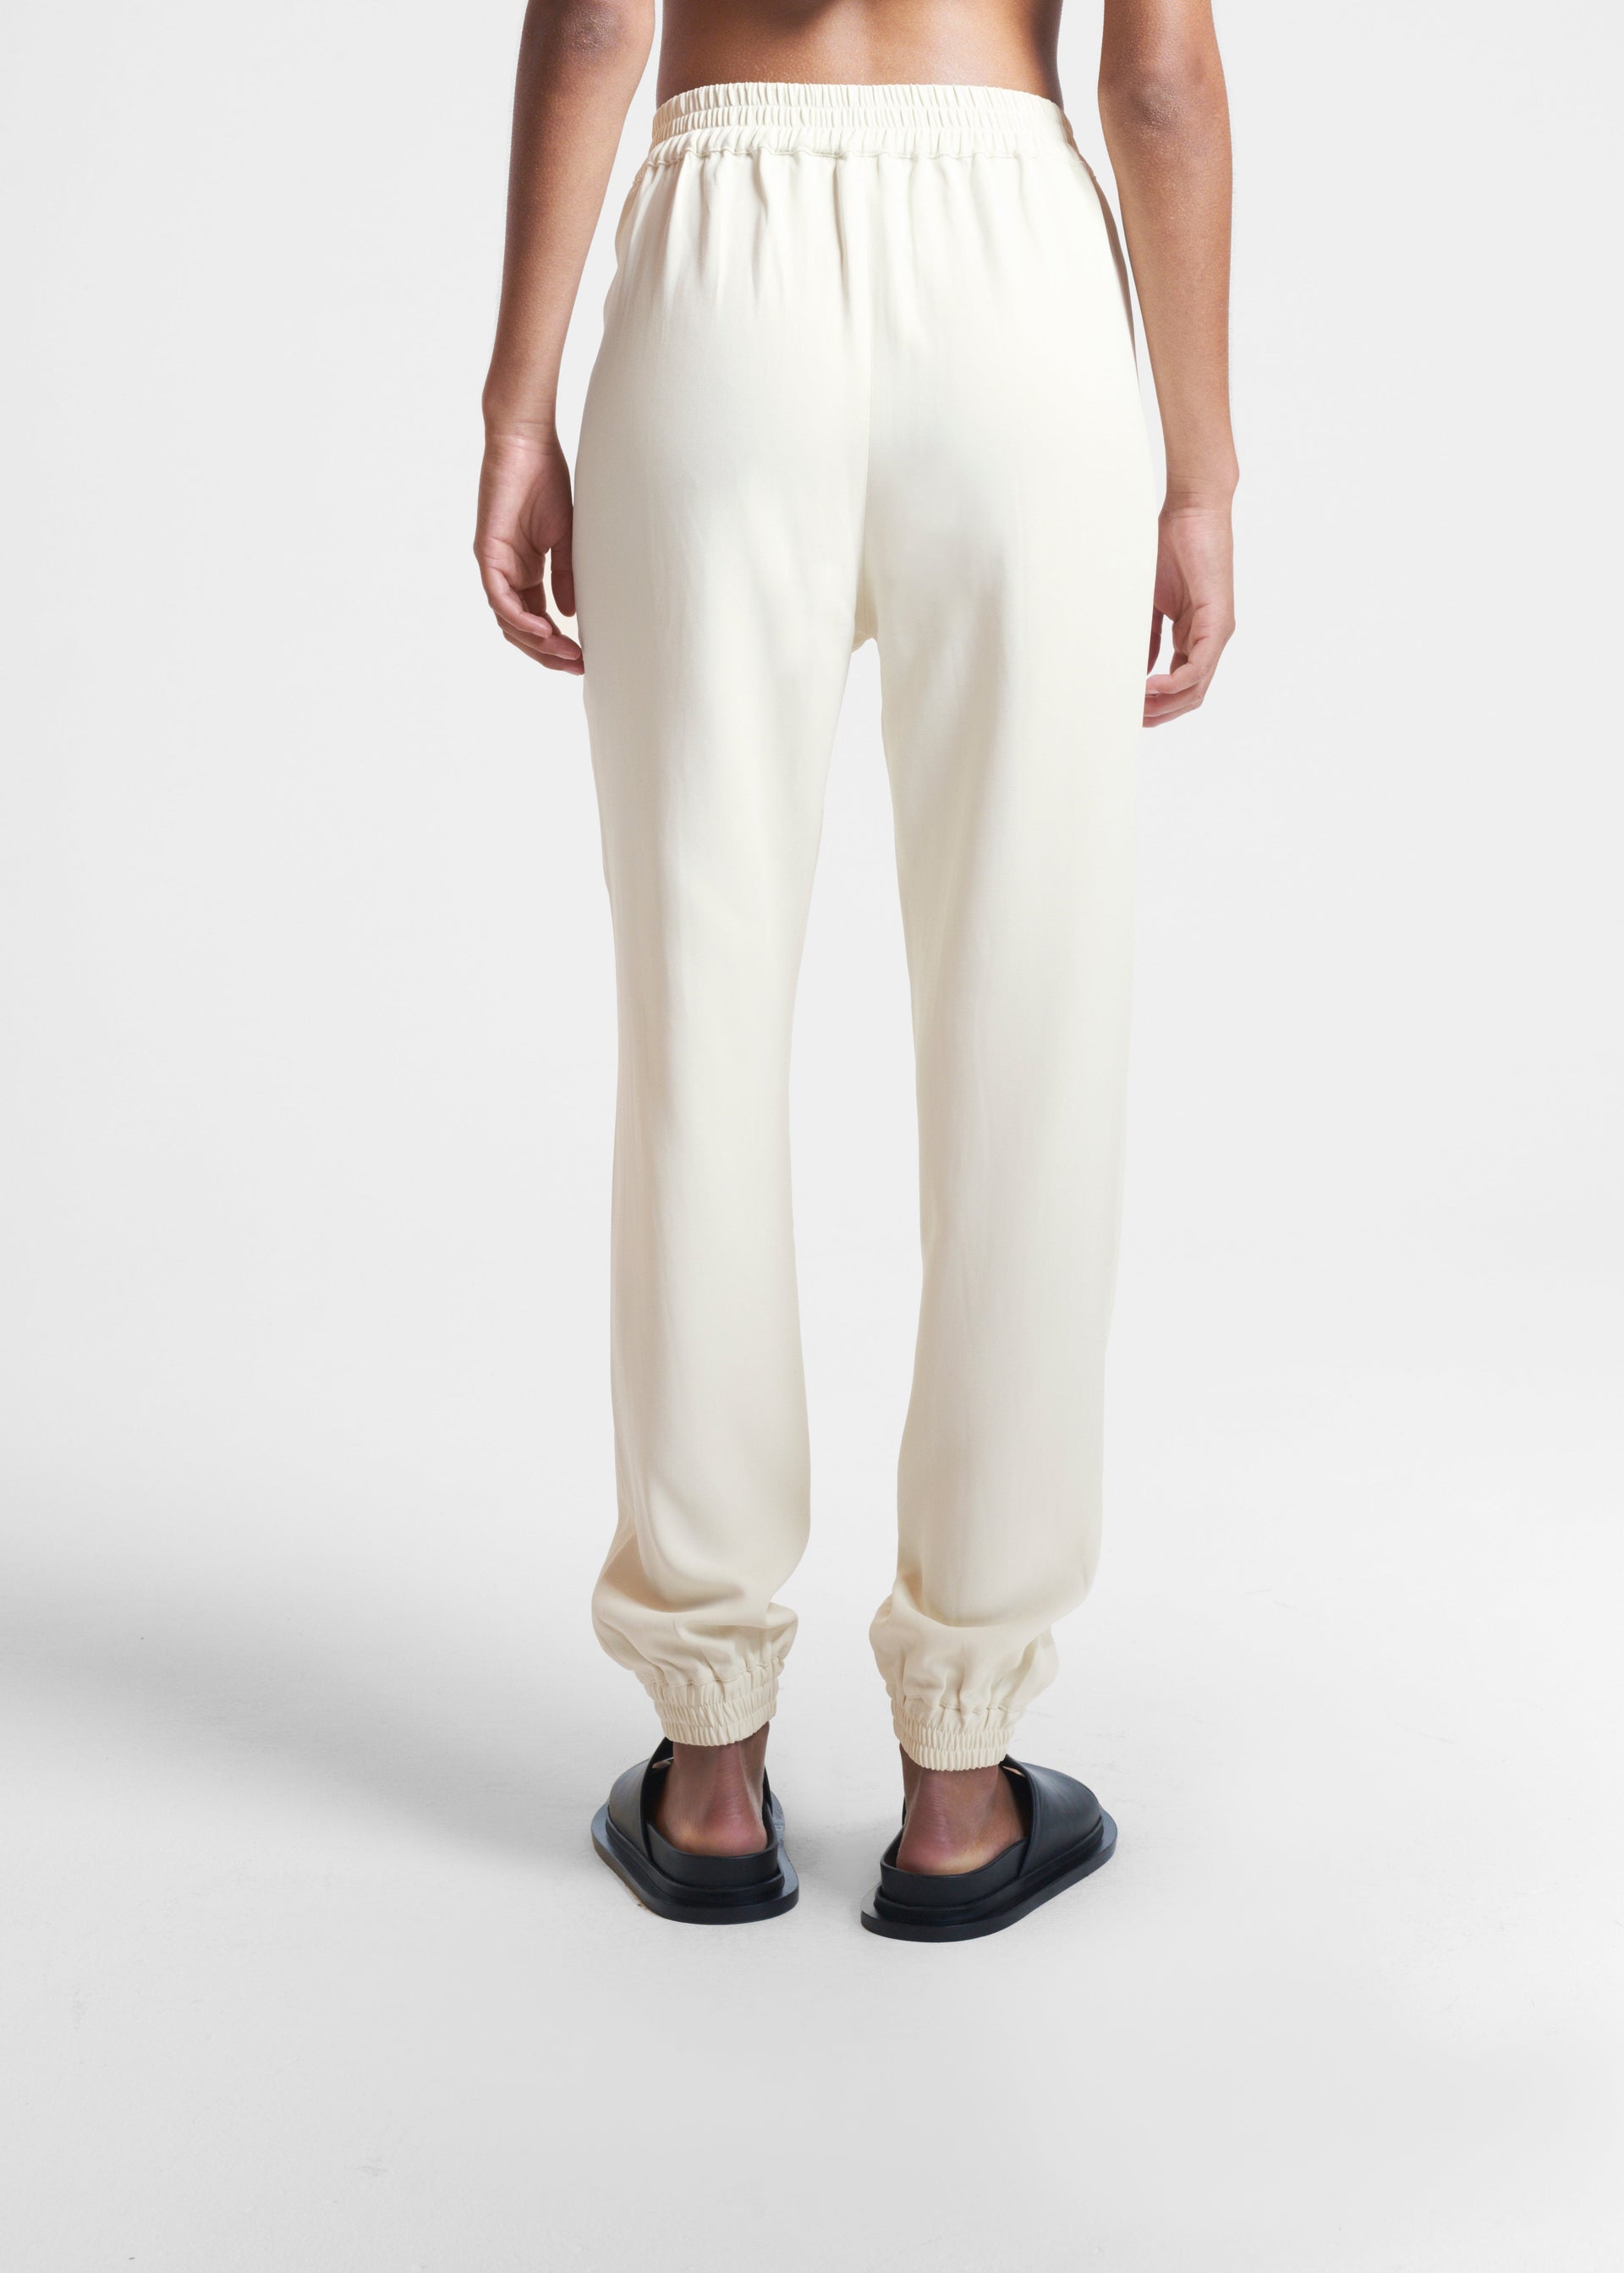 Moscow Elasticated Cuff Trouser Papyrus Viscose Crepe